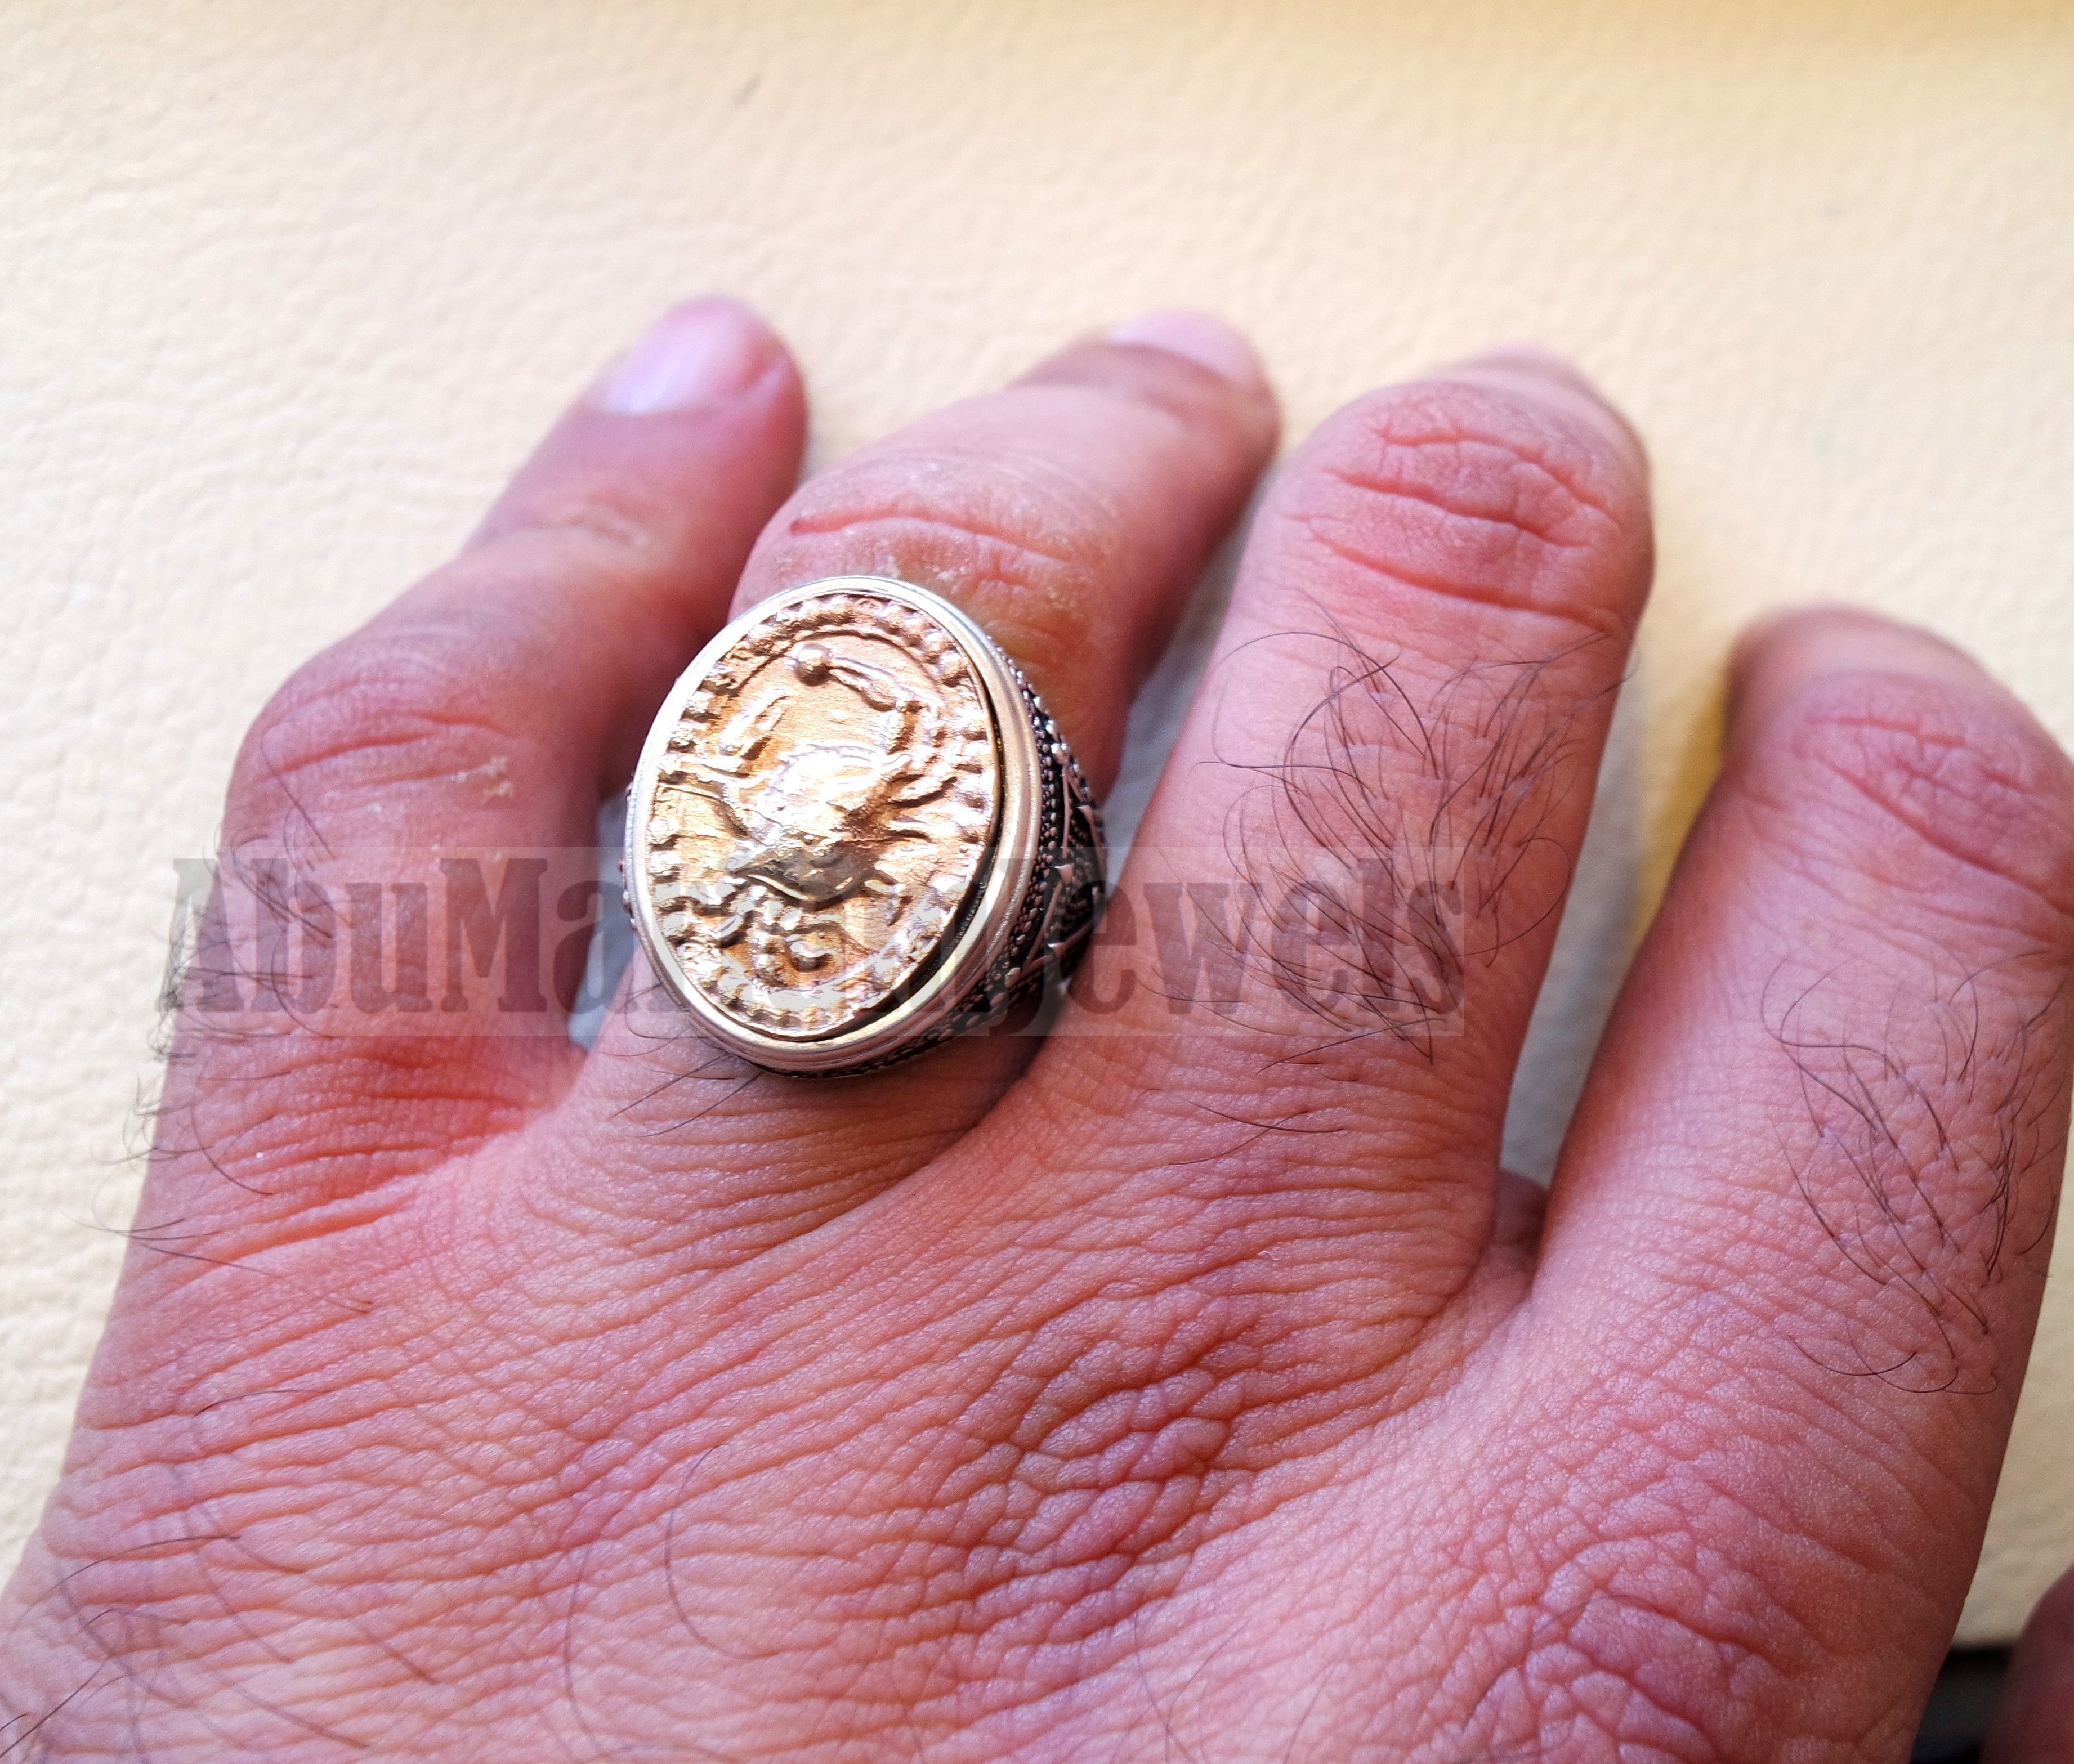 Horoscopes zodiac sign cancer sterling silver 925 and antique bronze huge men ring all sizes men jewelry gift that bring luck fast shipping